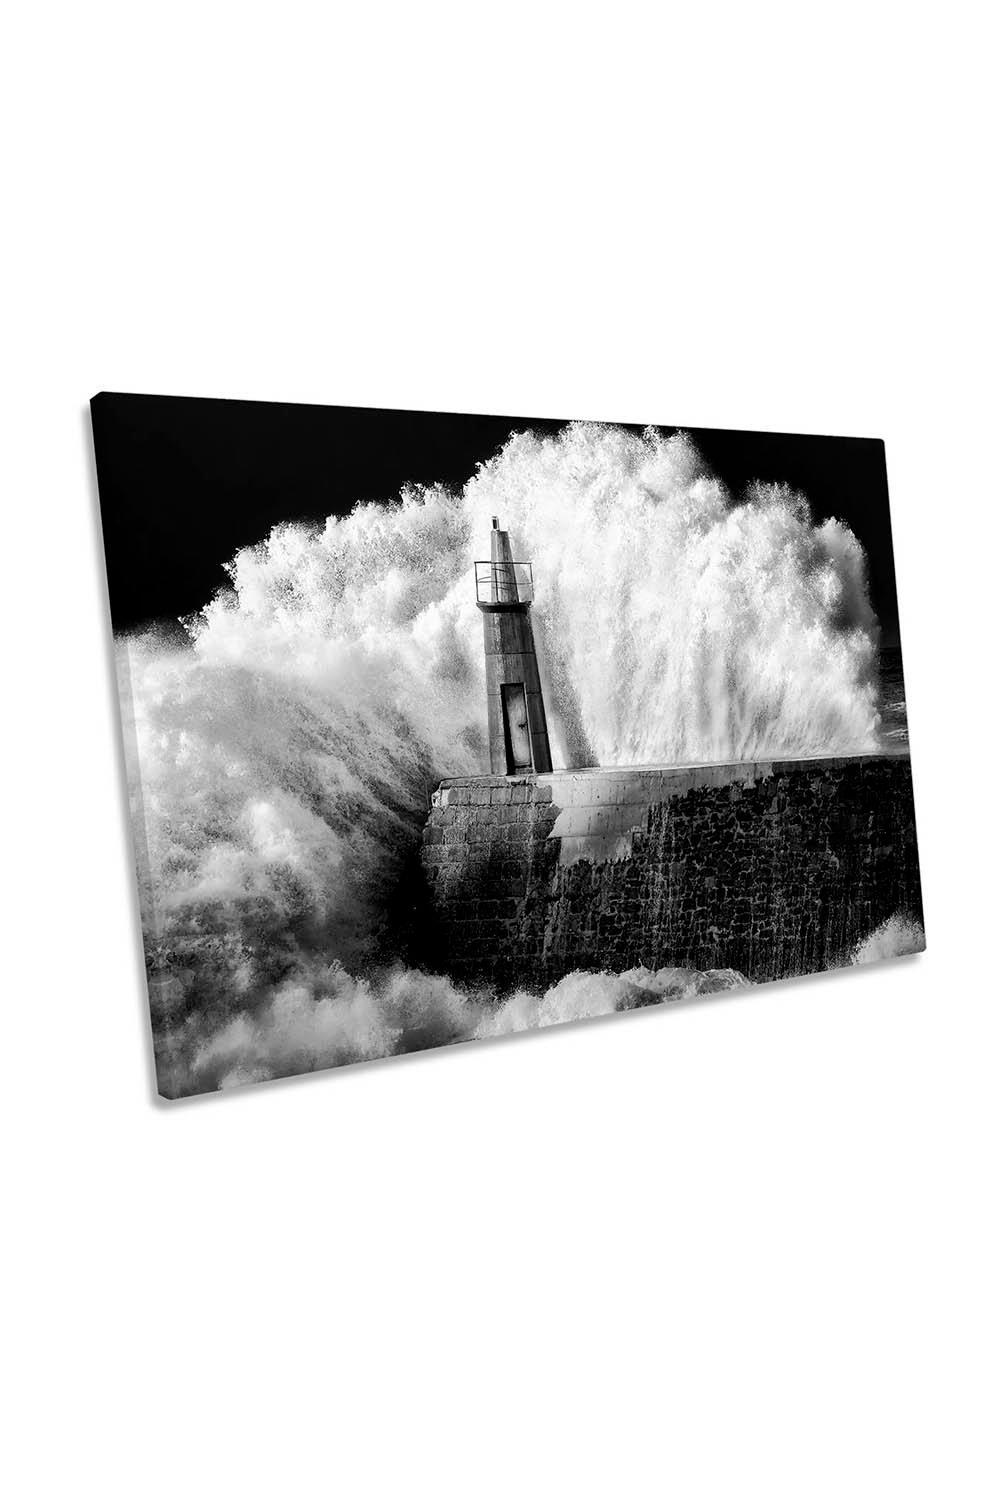 The Lighthouse Crashing Wave Canvas Wall Art Picture Print